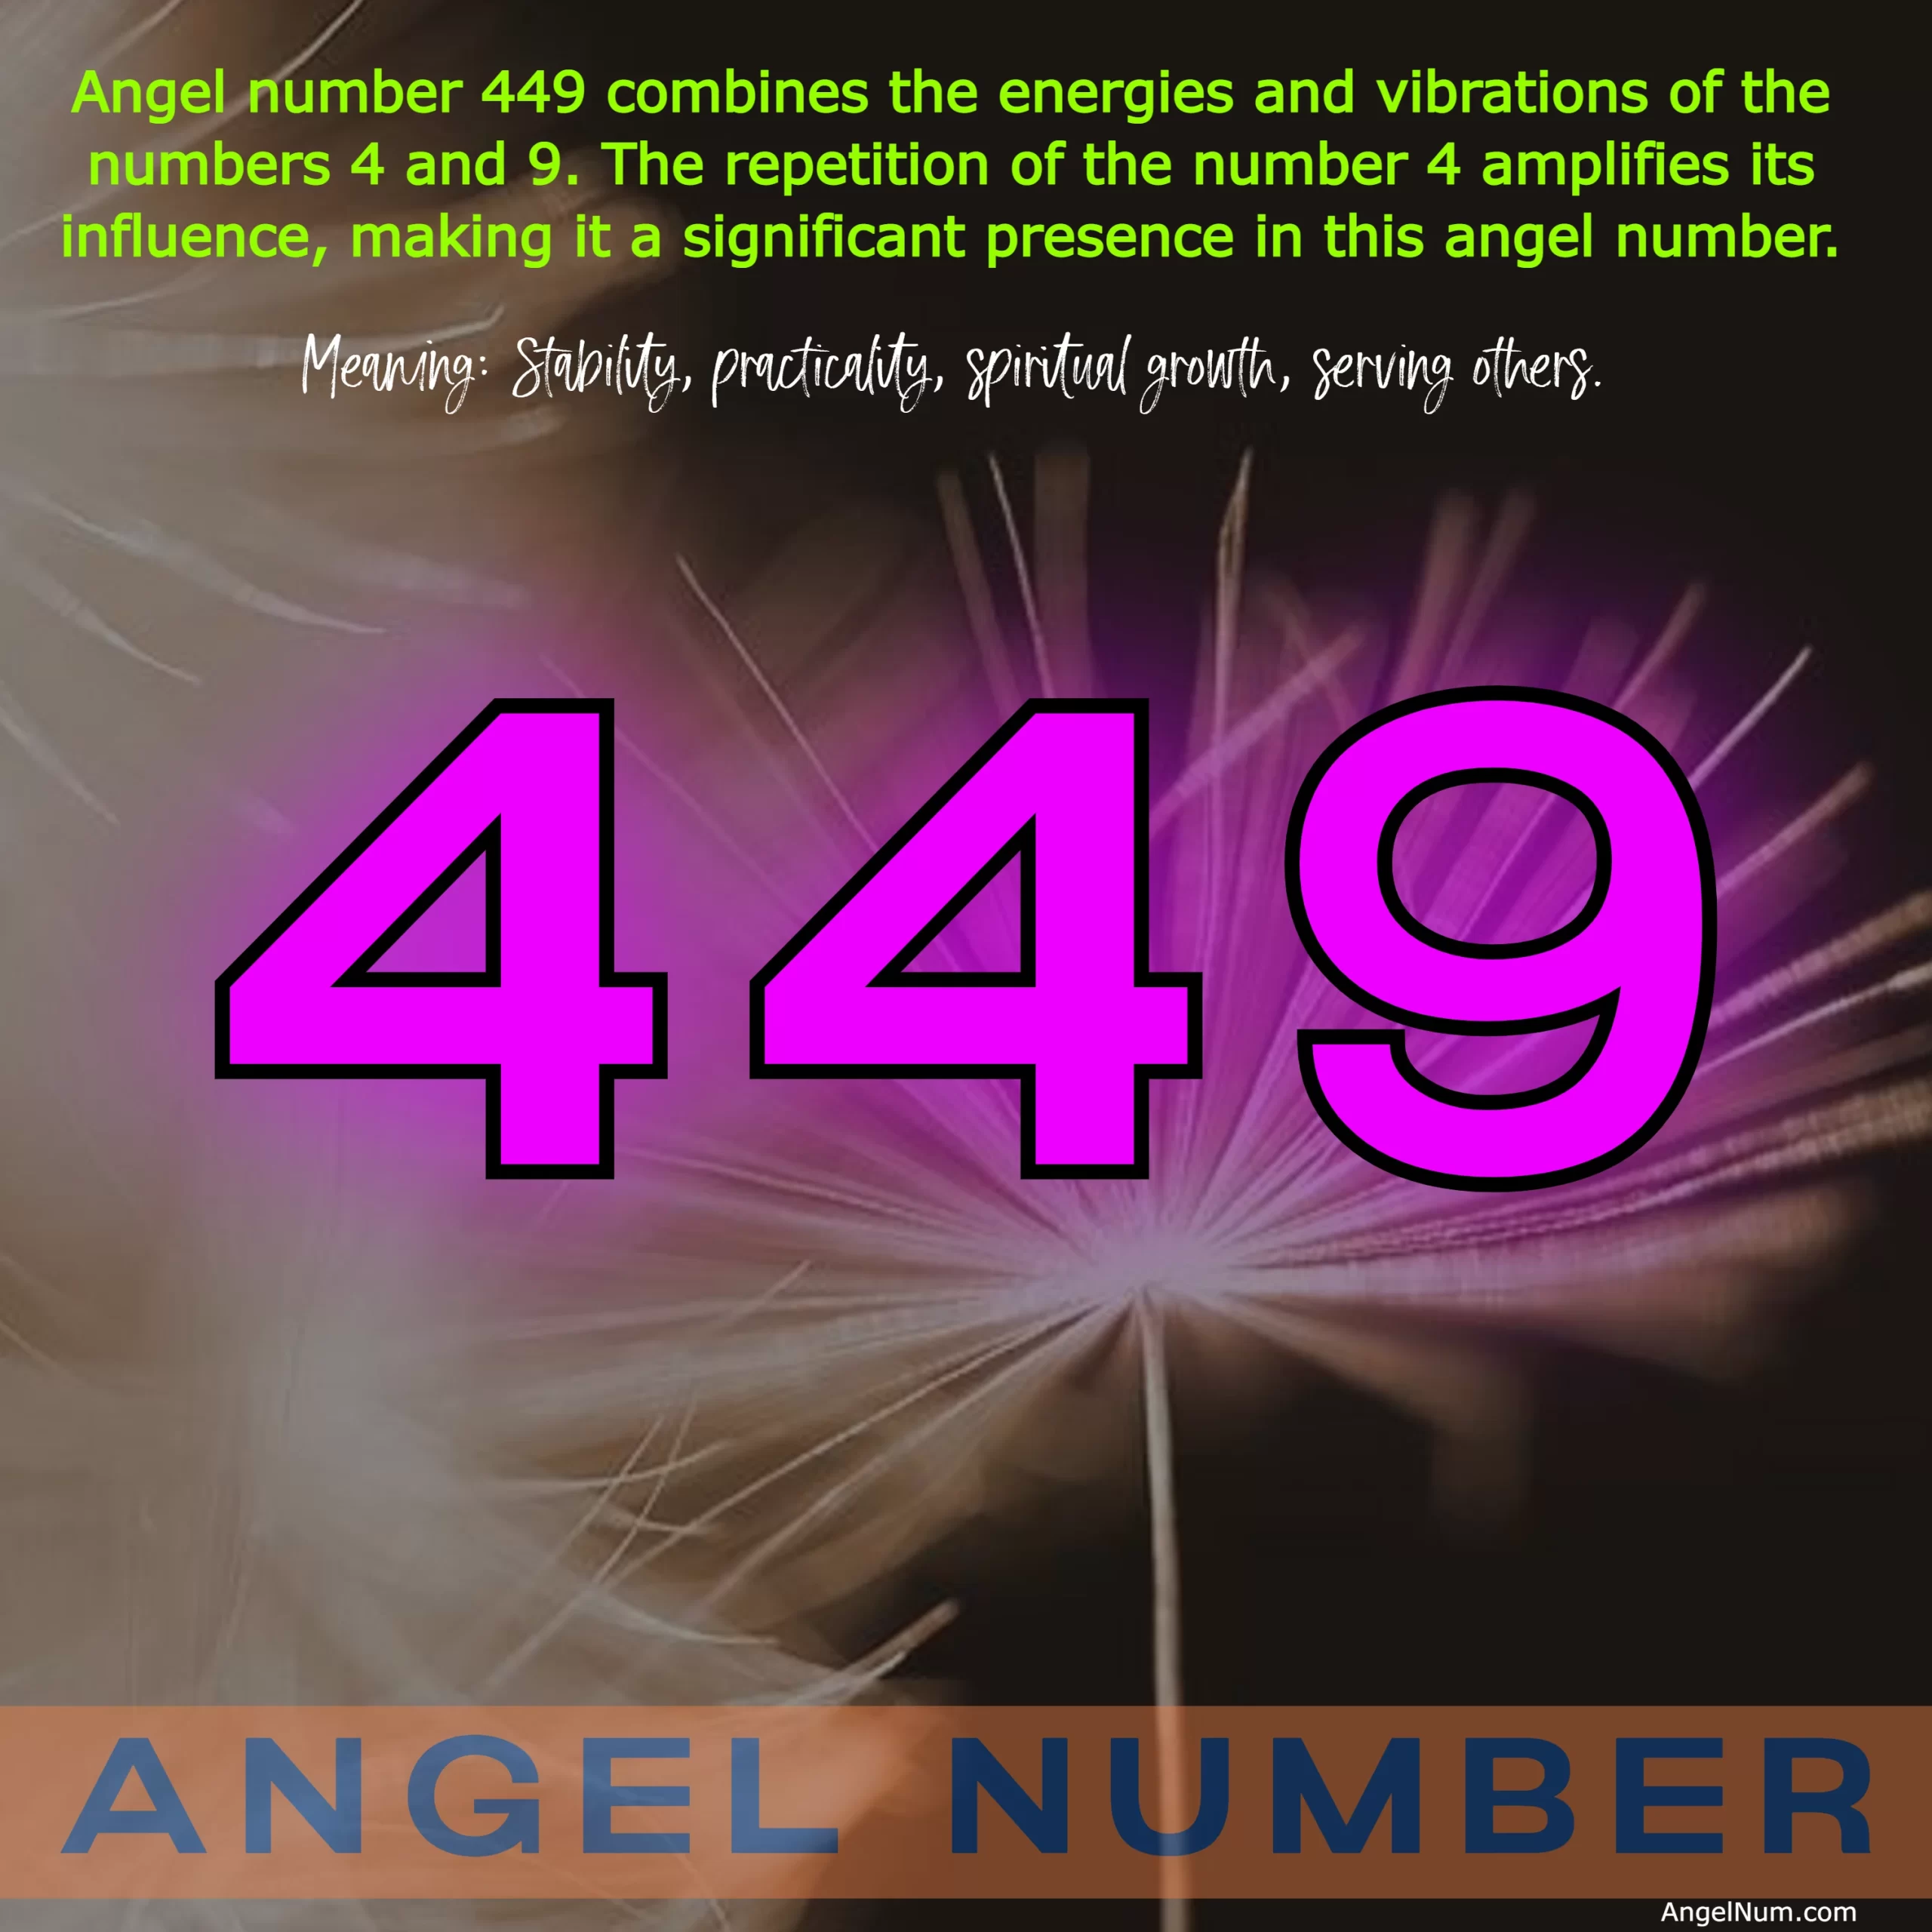 Angel Number 449: Messages of Stability Spiritual Growth and Service